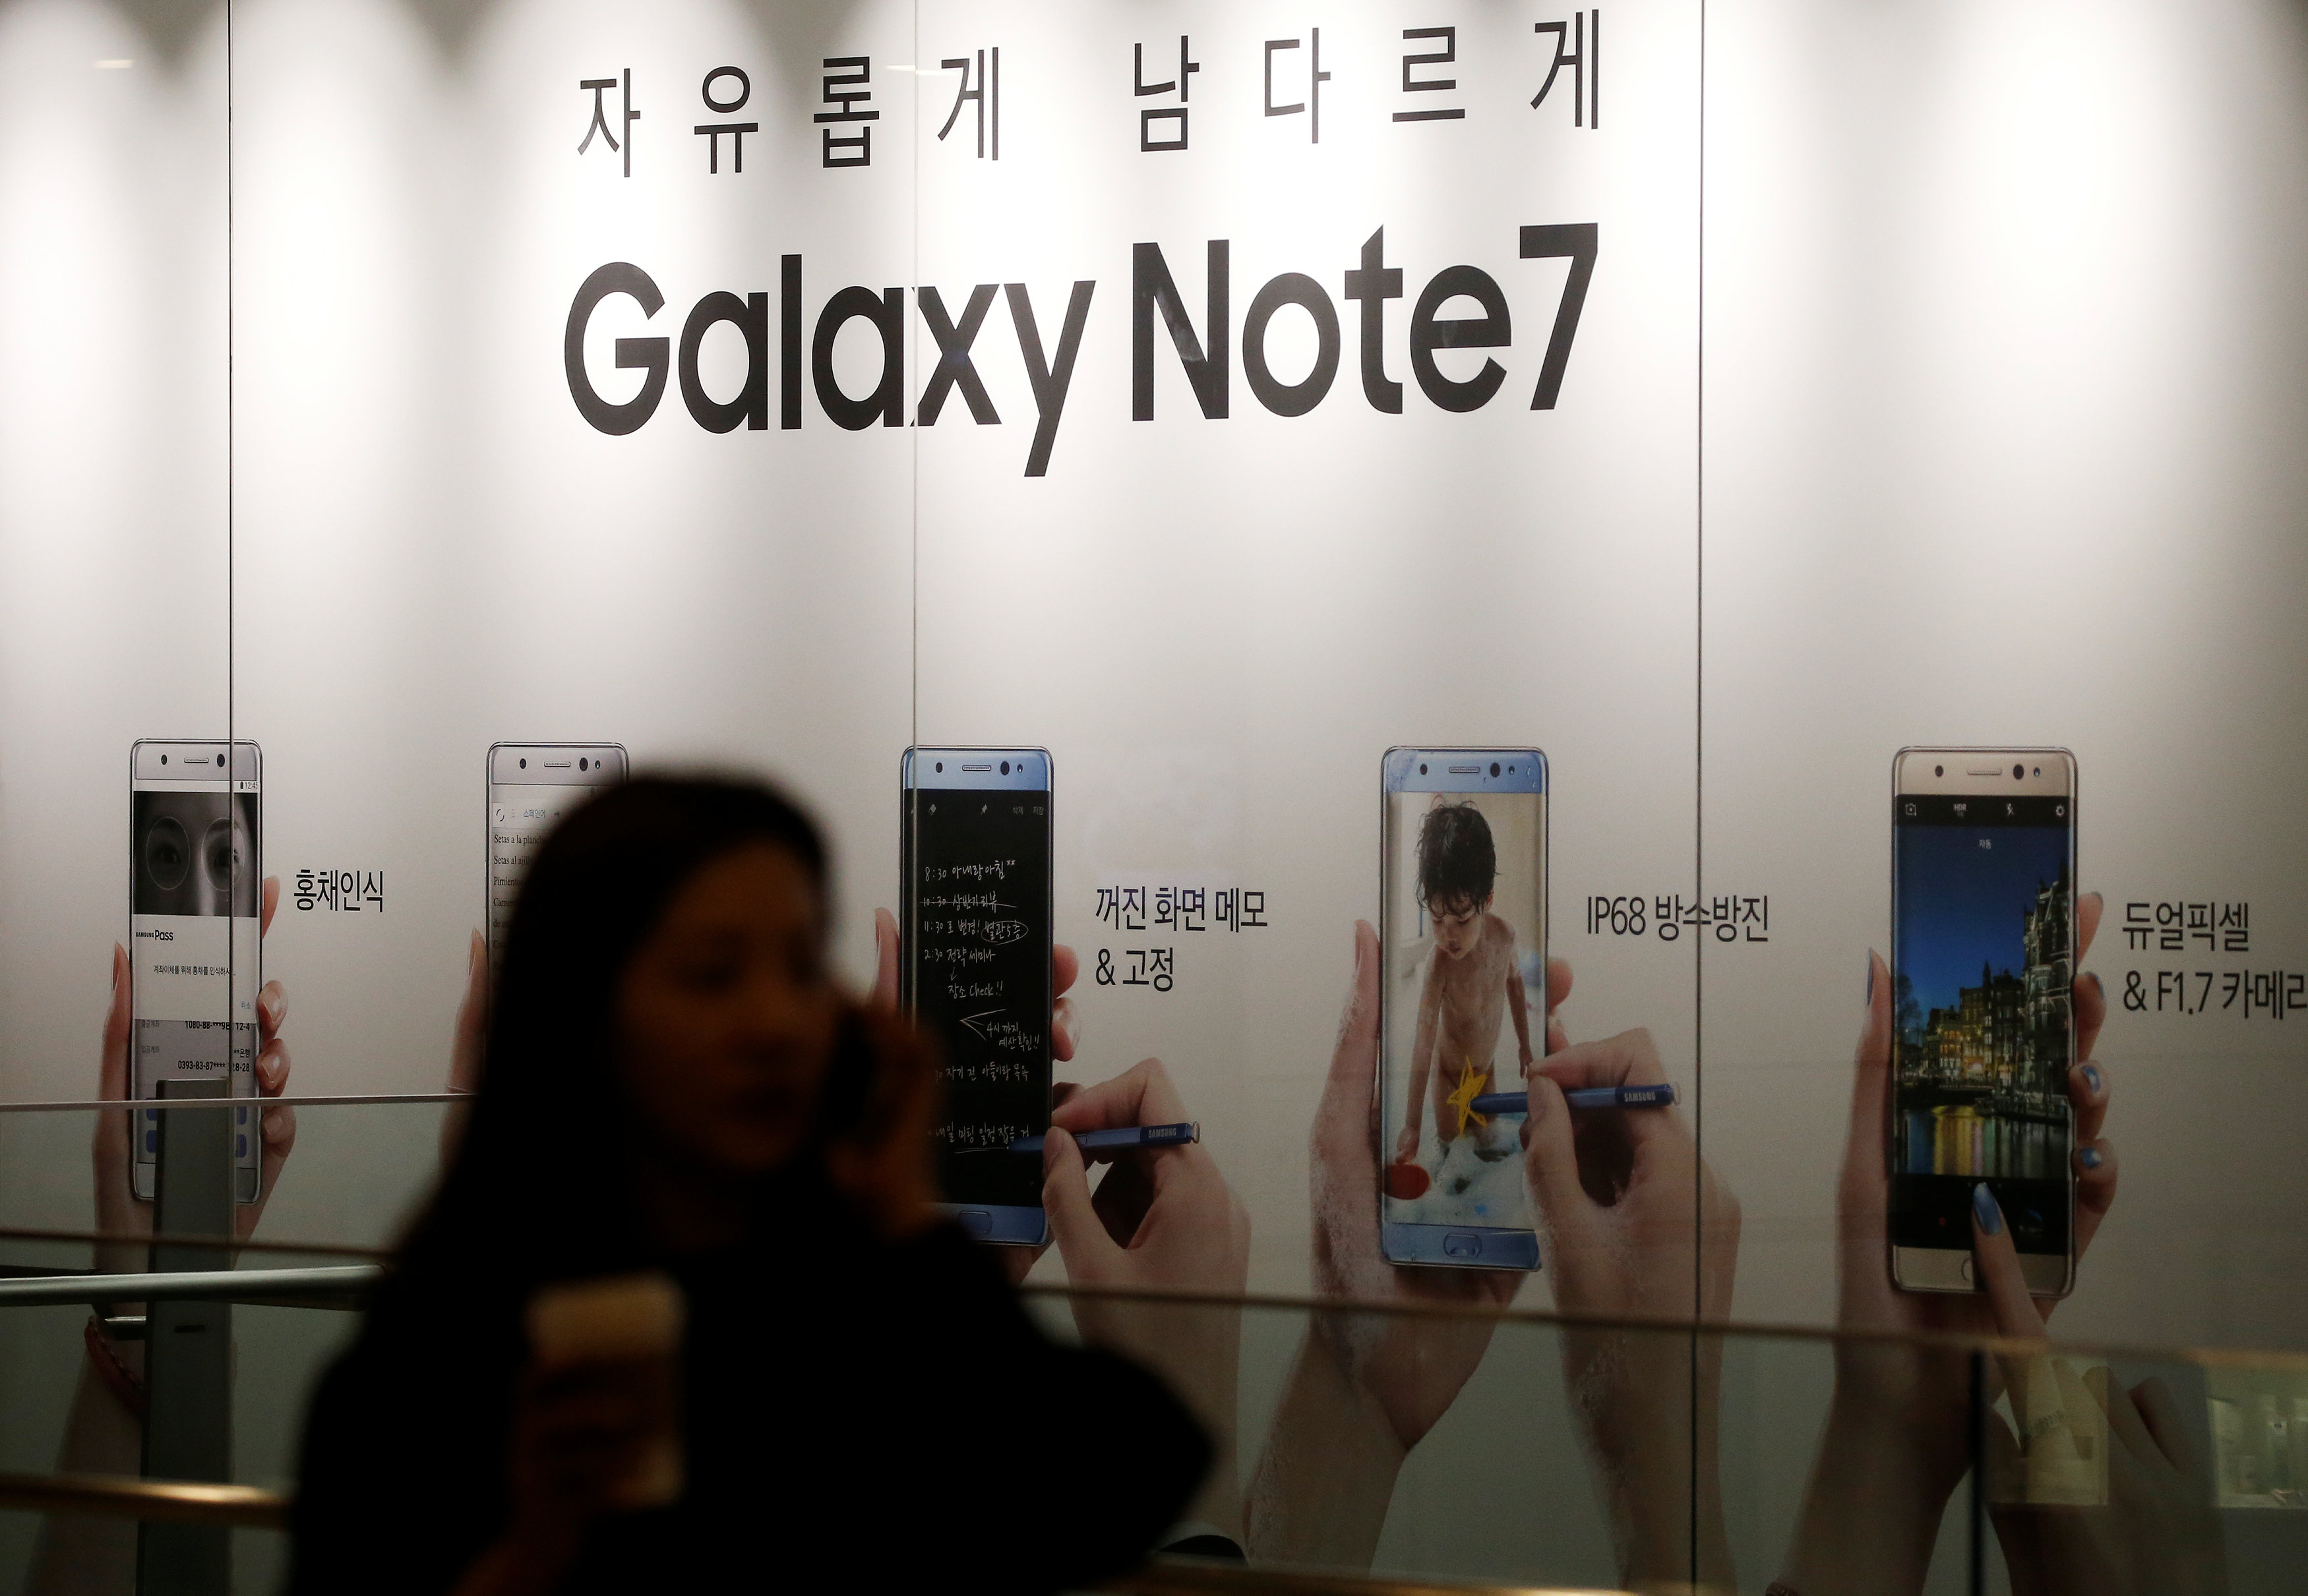 A woman talking on her mobile phone walks past an advertisement promoting Samsung Electronics' Galaxy Note 7 at company's headquarters in Seoul, South Korea, October 11, 2016. REUTERS/Kim Hong-Jin